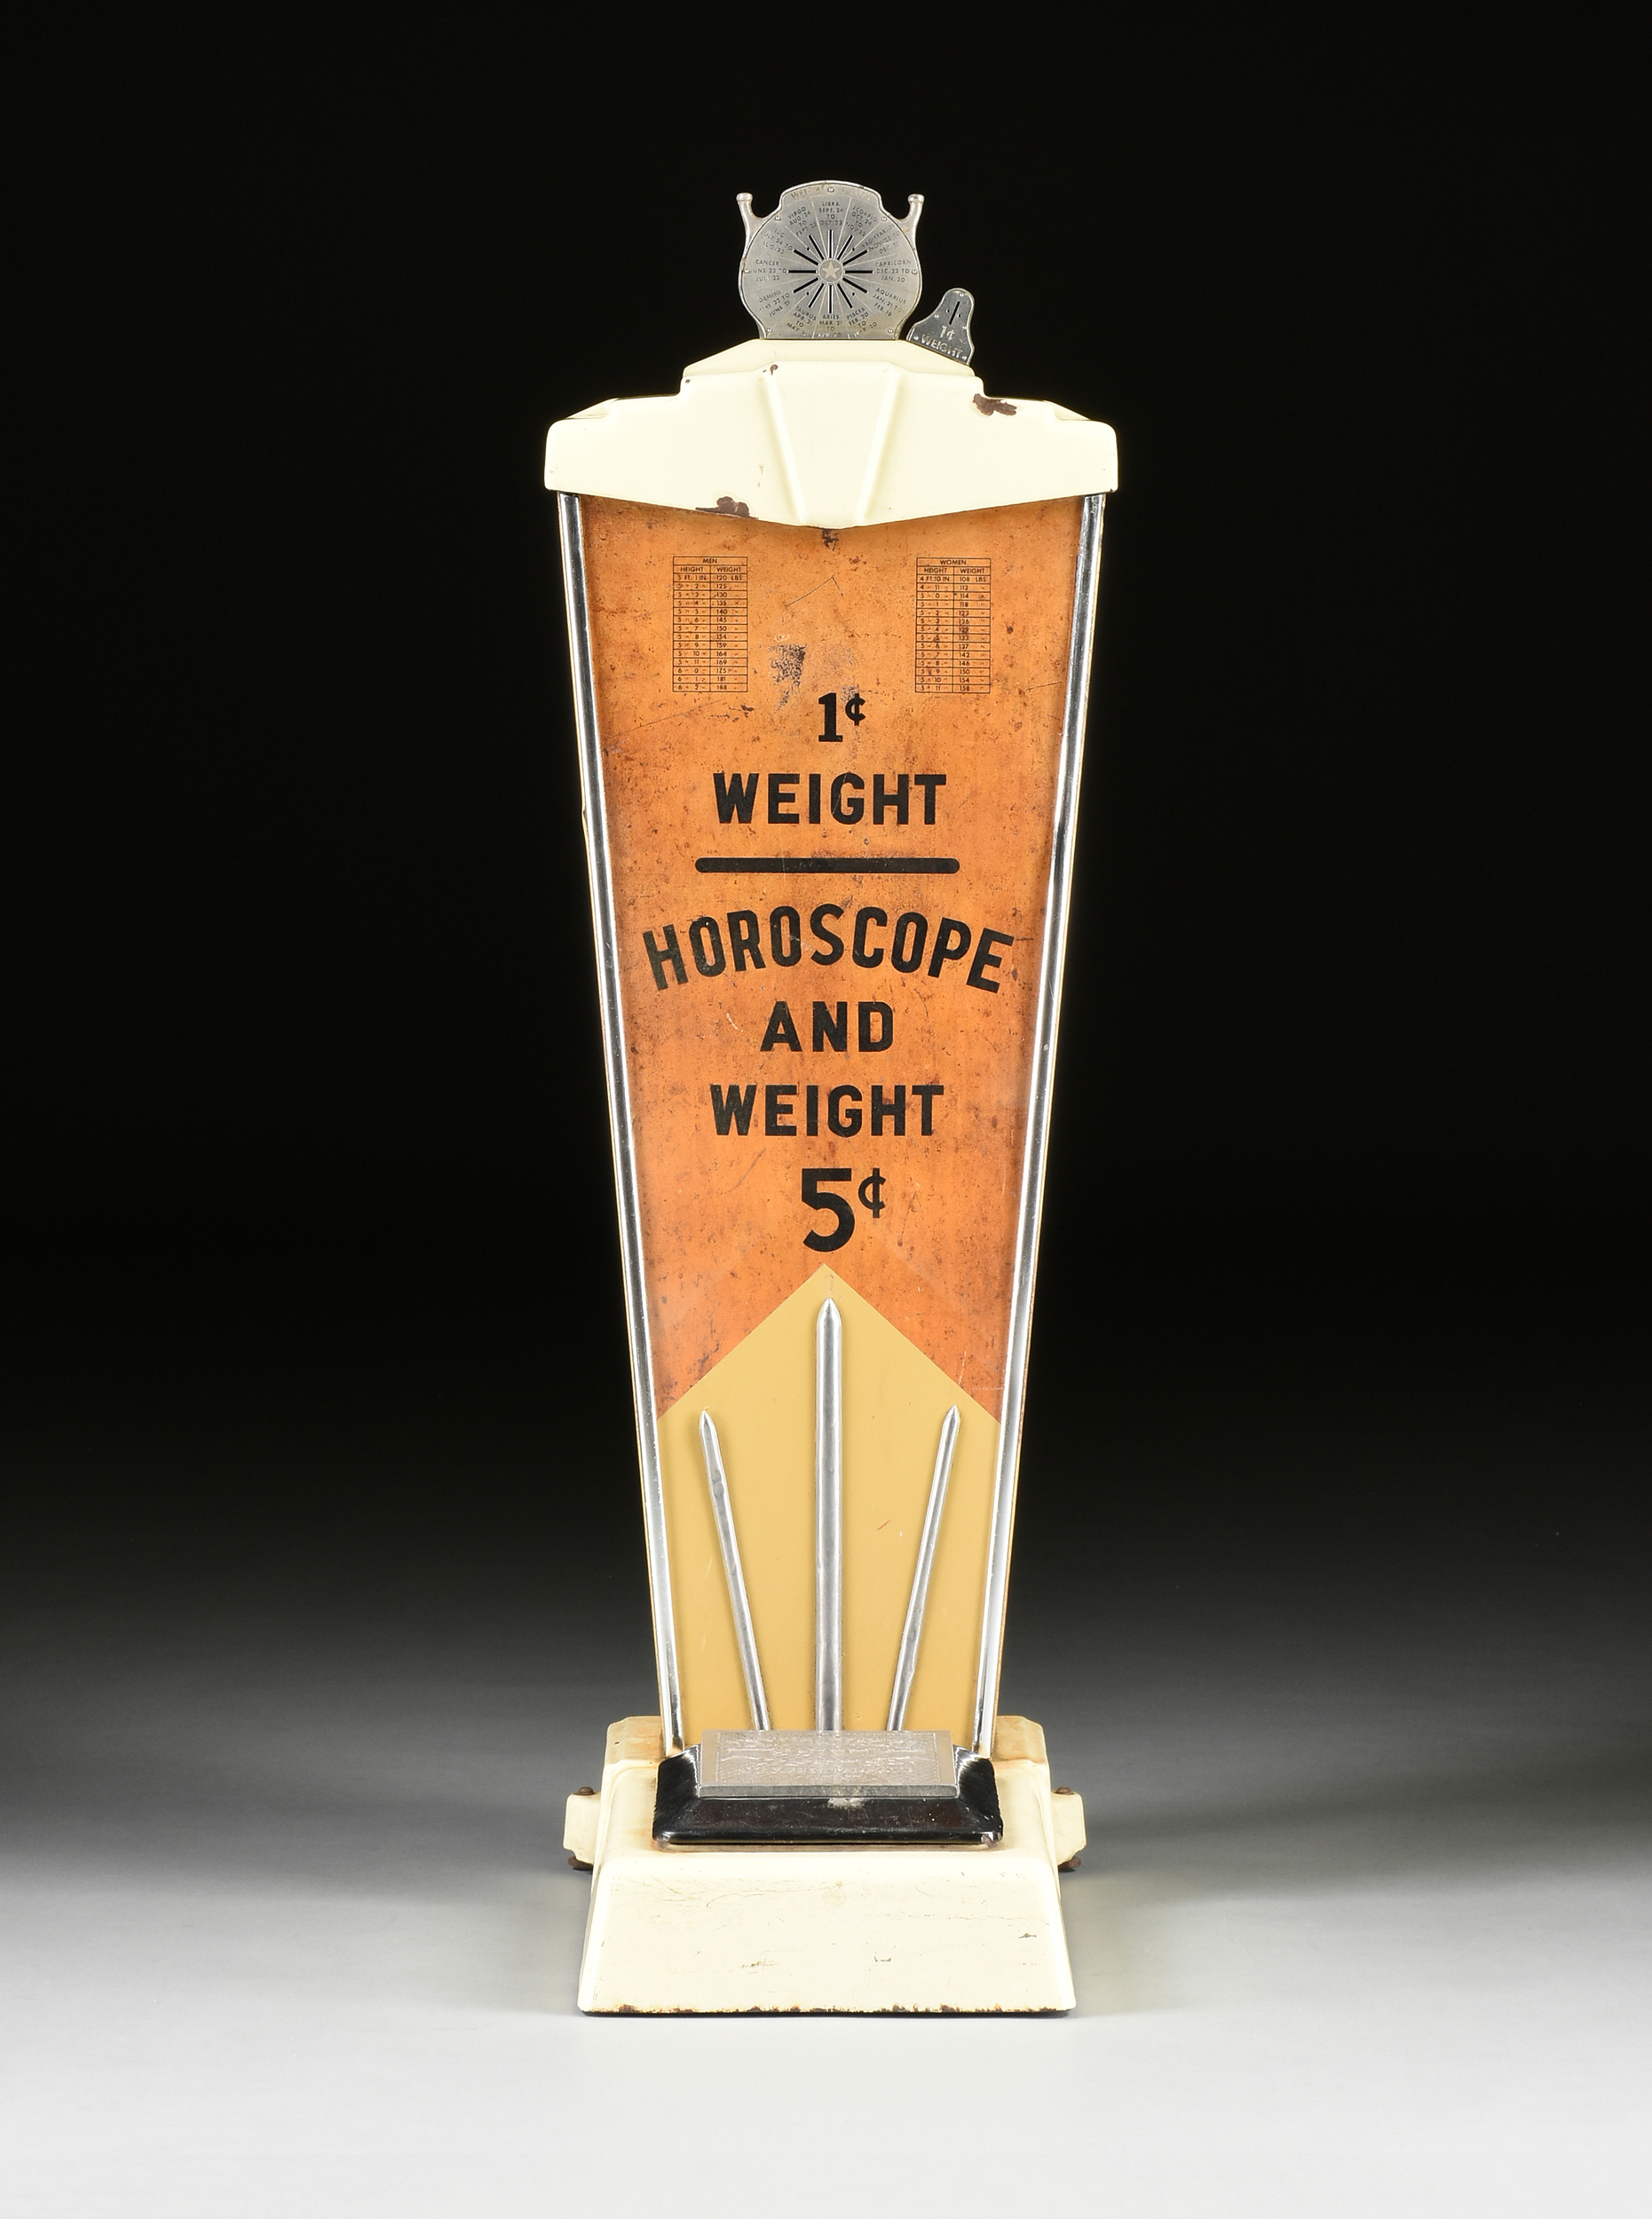 AN AMERICAN SCALE MANUFACTURING CO. FORTUNE MODEL 300 "1¬¢ Weight-Horoscope & Weight 5¬¢," COIN